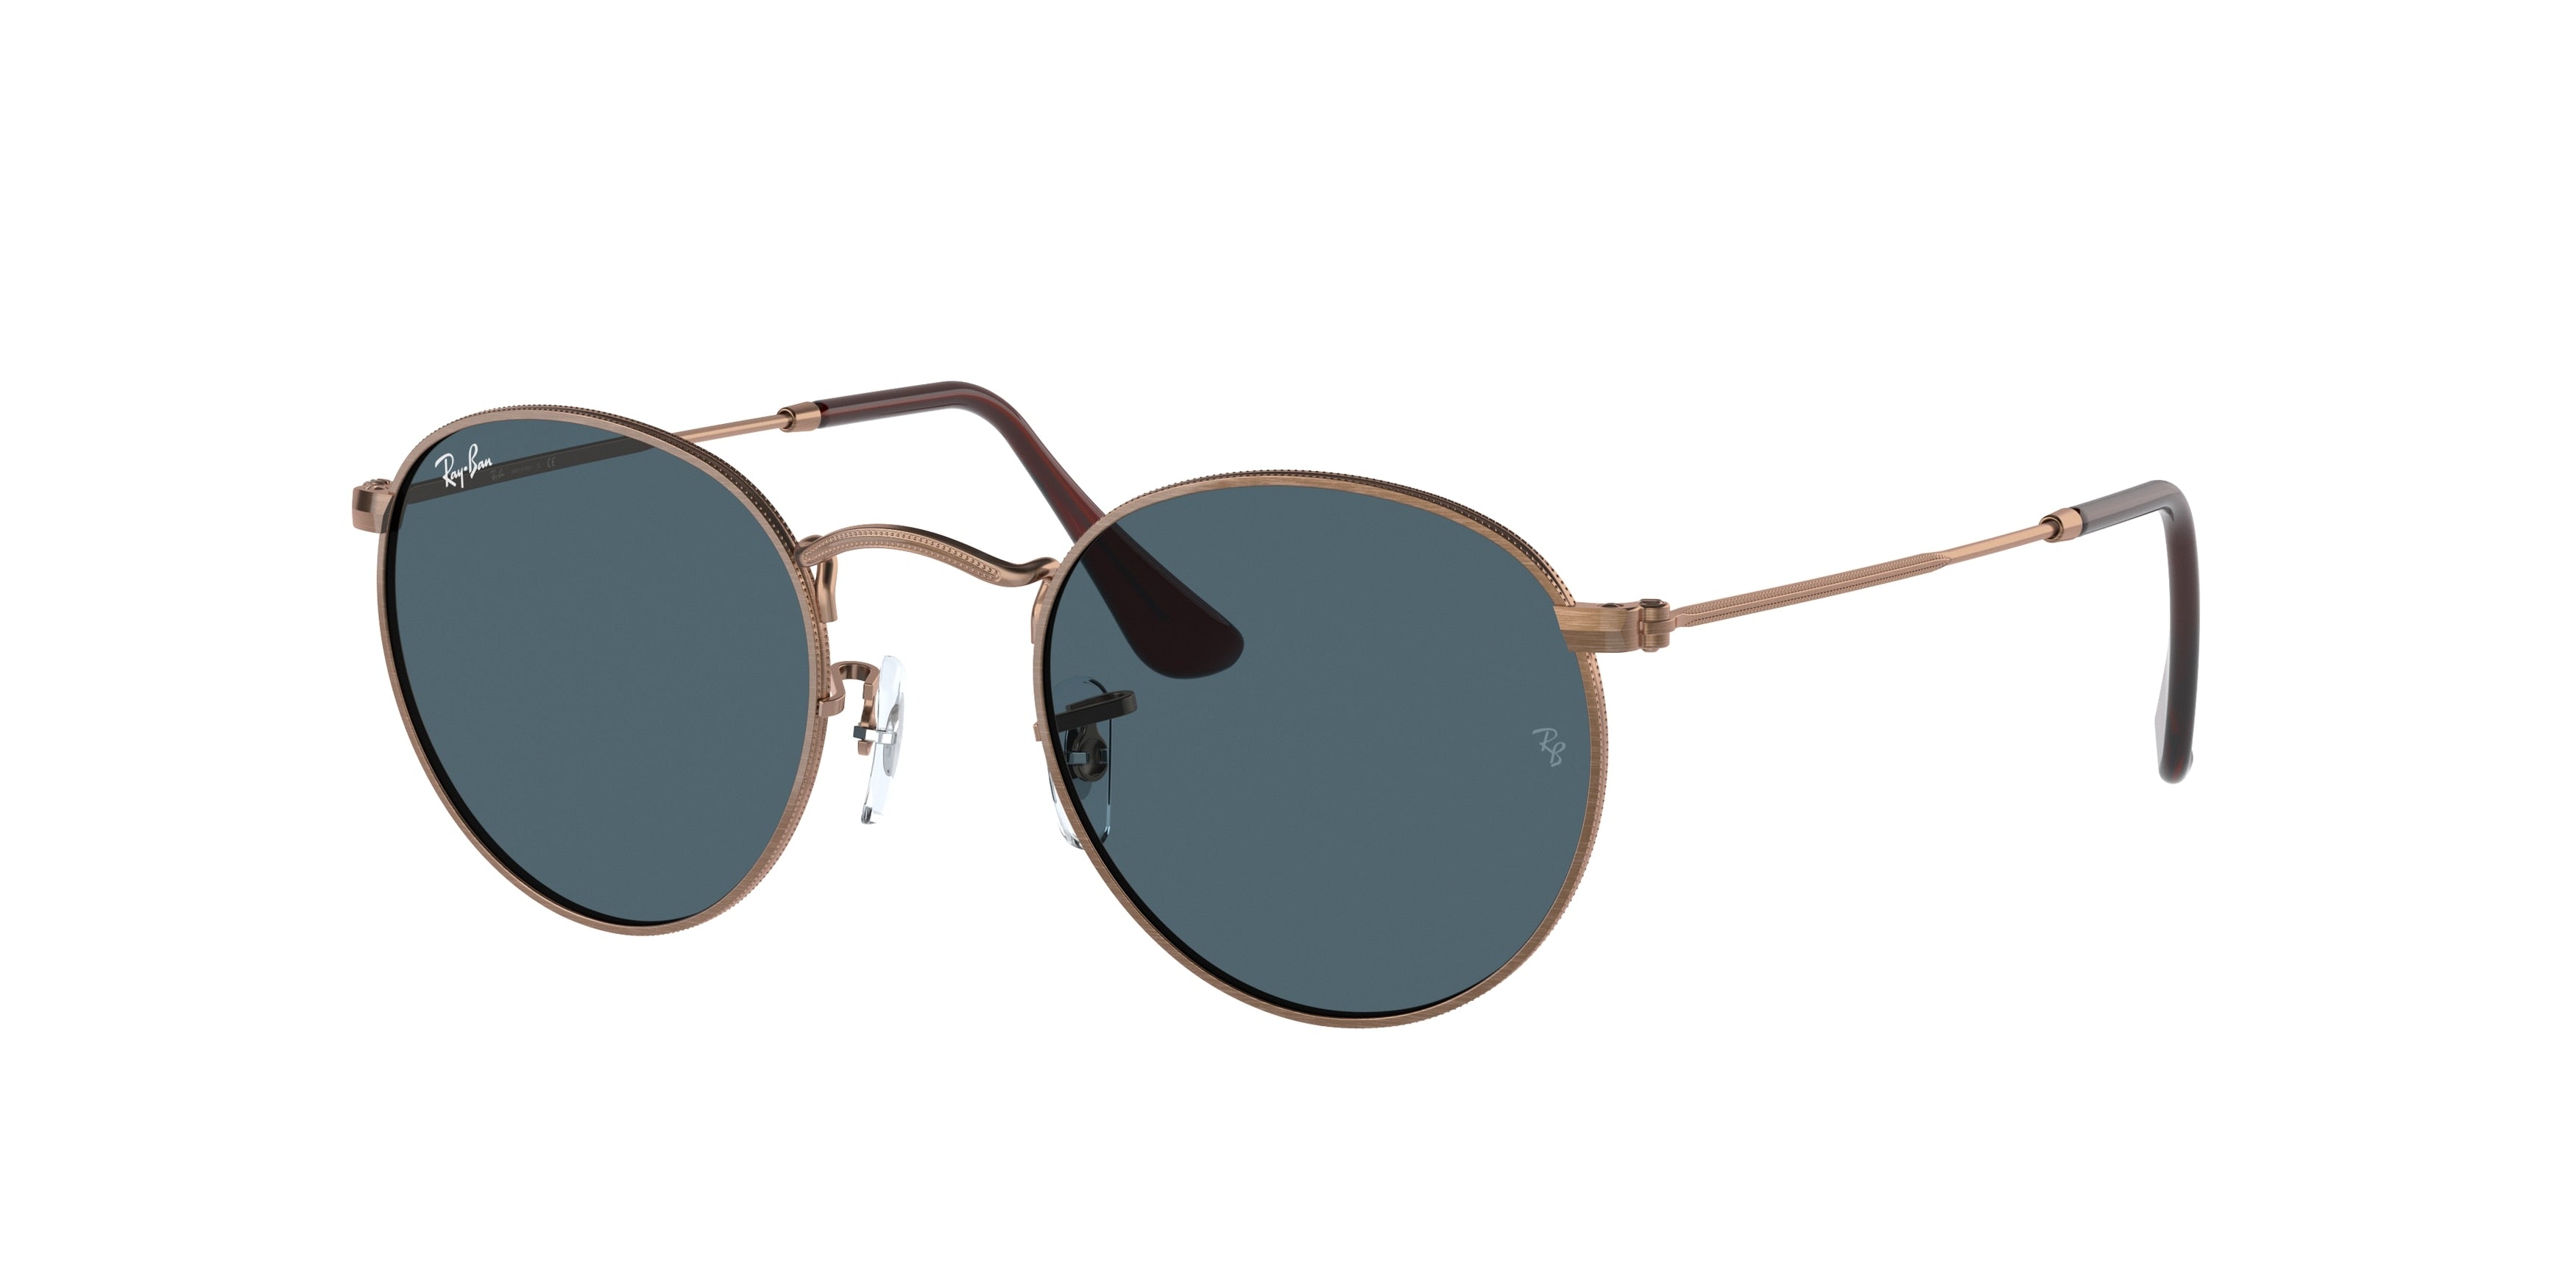 Ray-Ban ROUND METAL RB3447 Round Sunglasses  9230R5-Bronze-Copper 52-145-21 - Color Map Copper